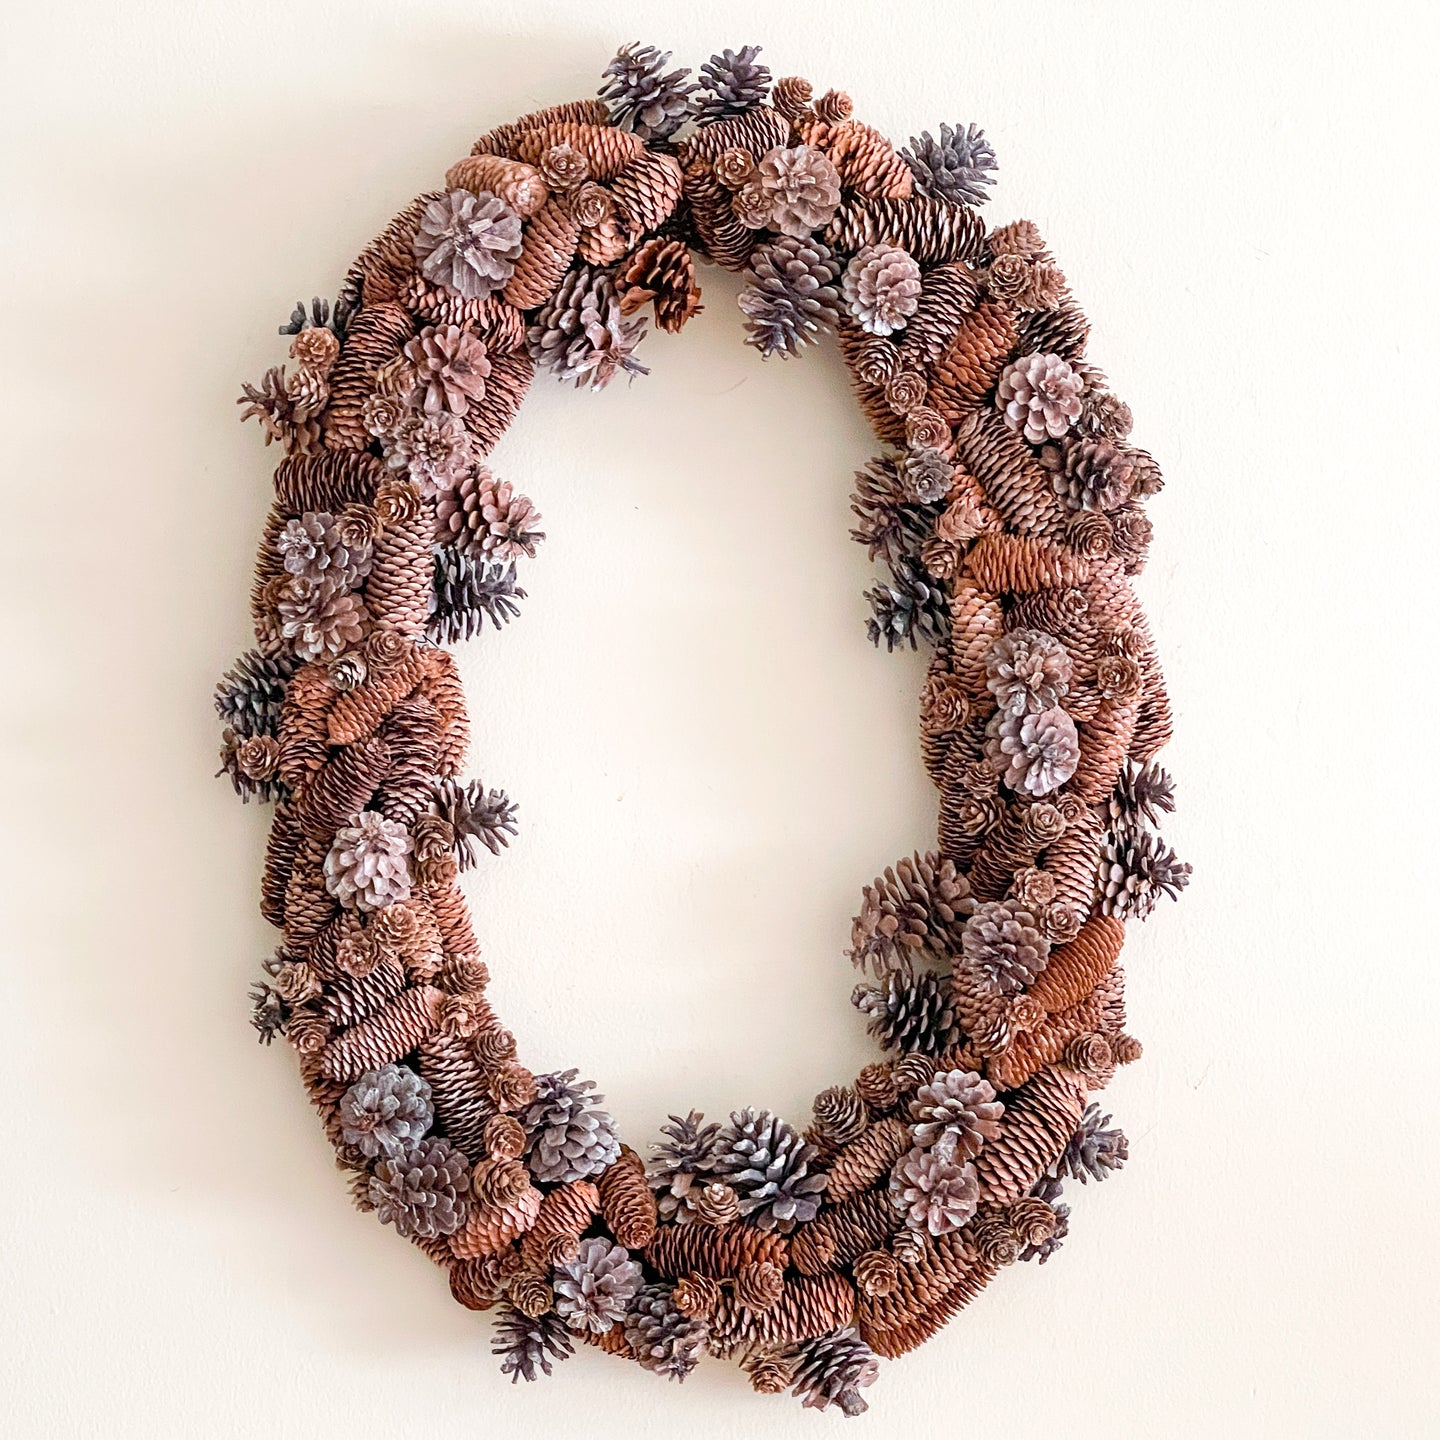 Rustic Pinecone Oval Wreath